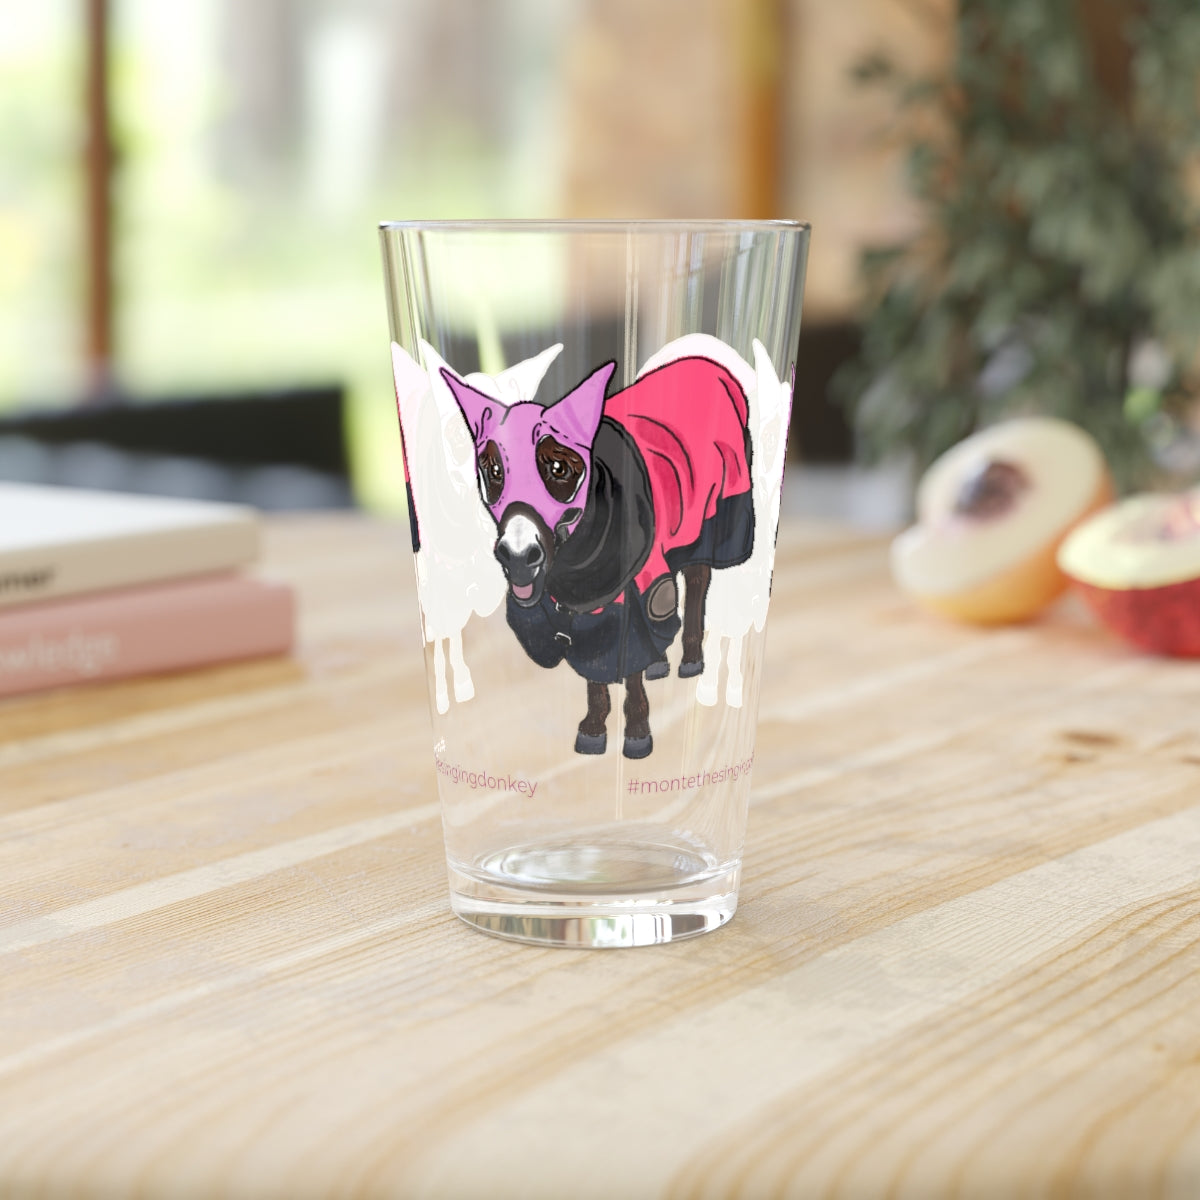 Monte the Singing Donkey in His Winter Wear - Pint Glass -  16oz